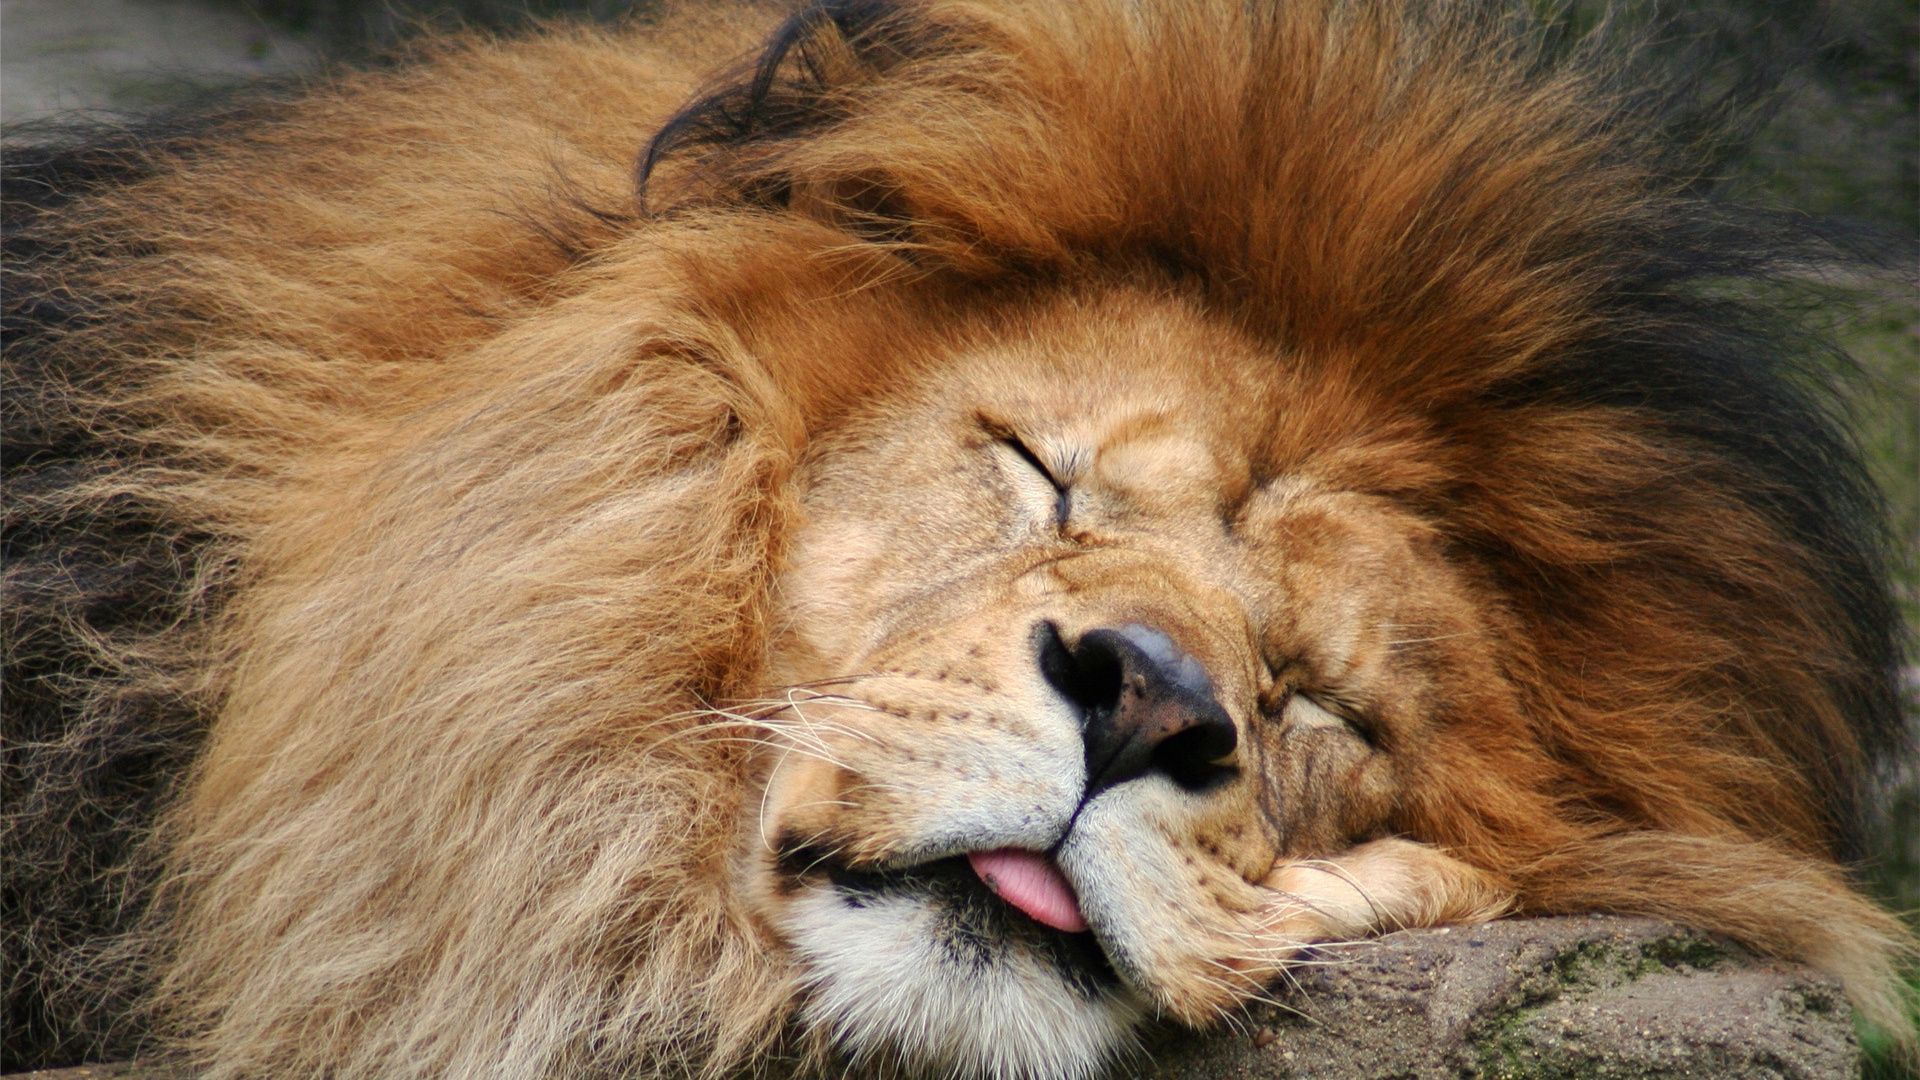 lion sleeping - Google Search | Animals | Pinterest | Lions and Animal